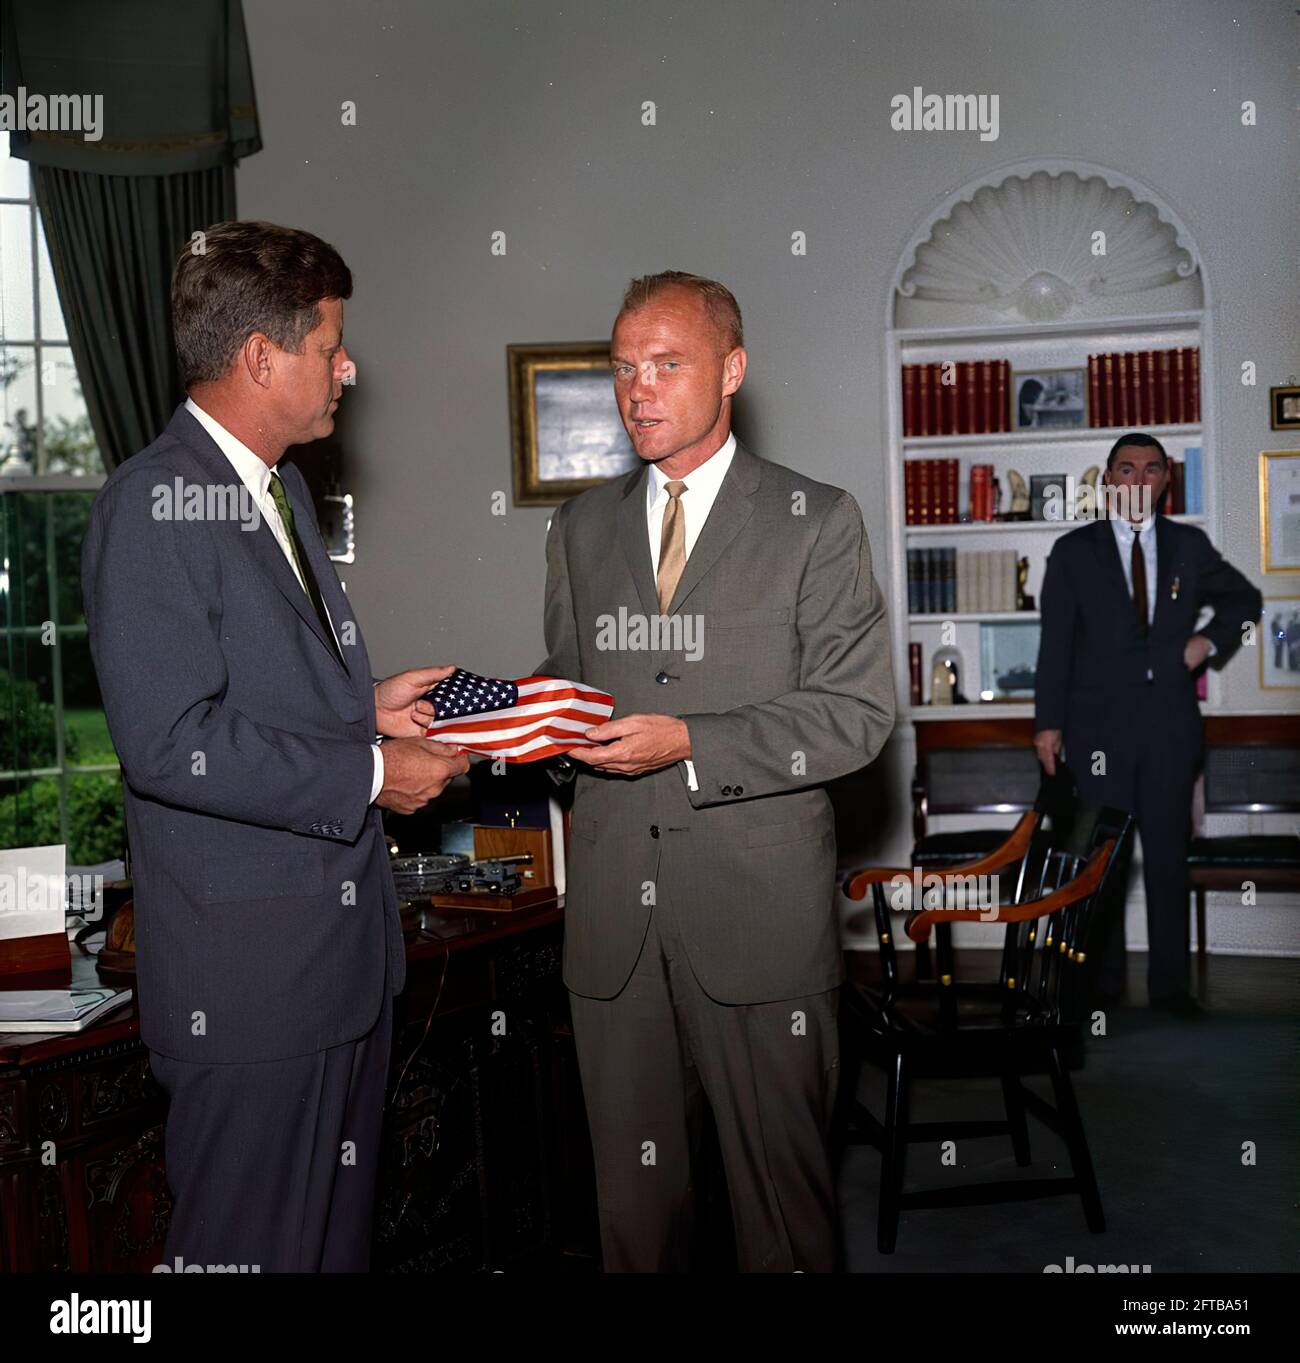 President John F. Kennedy receives a gift of an American flag from astronaut Lieutenant Colonel John H. Glenn, Jr. (right); Lt. Col. Glenn carried the flag in his space suit during his orbital flight aboard Mercury-Atlas 6, also known as Friendship 7. Special Assistant to the President, Kenneth P. O'Donnell, stands in the background. Oval Office, White House, Washington, D.C. Stock Photo